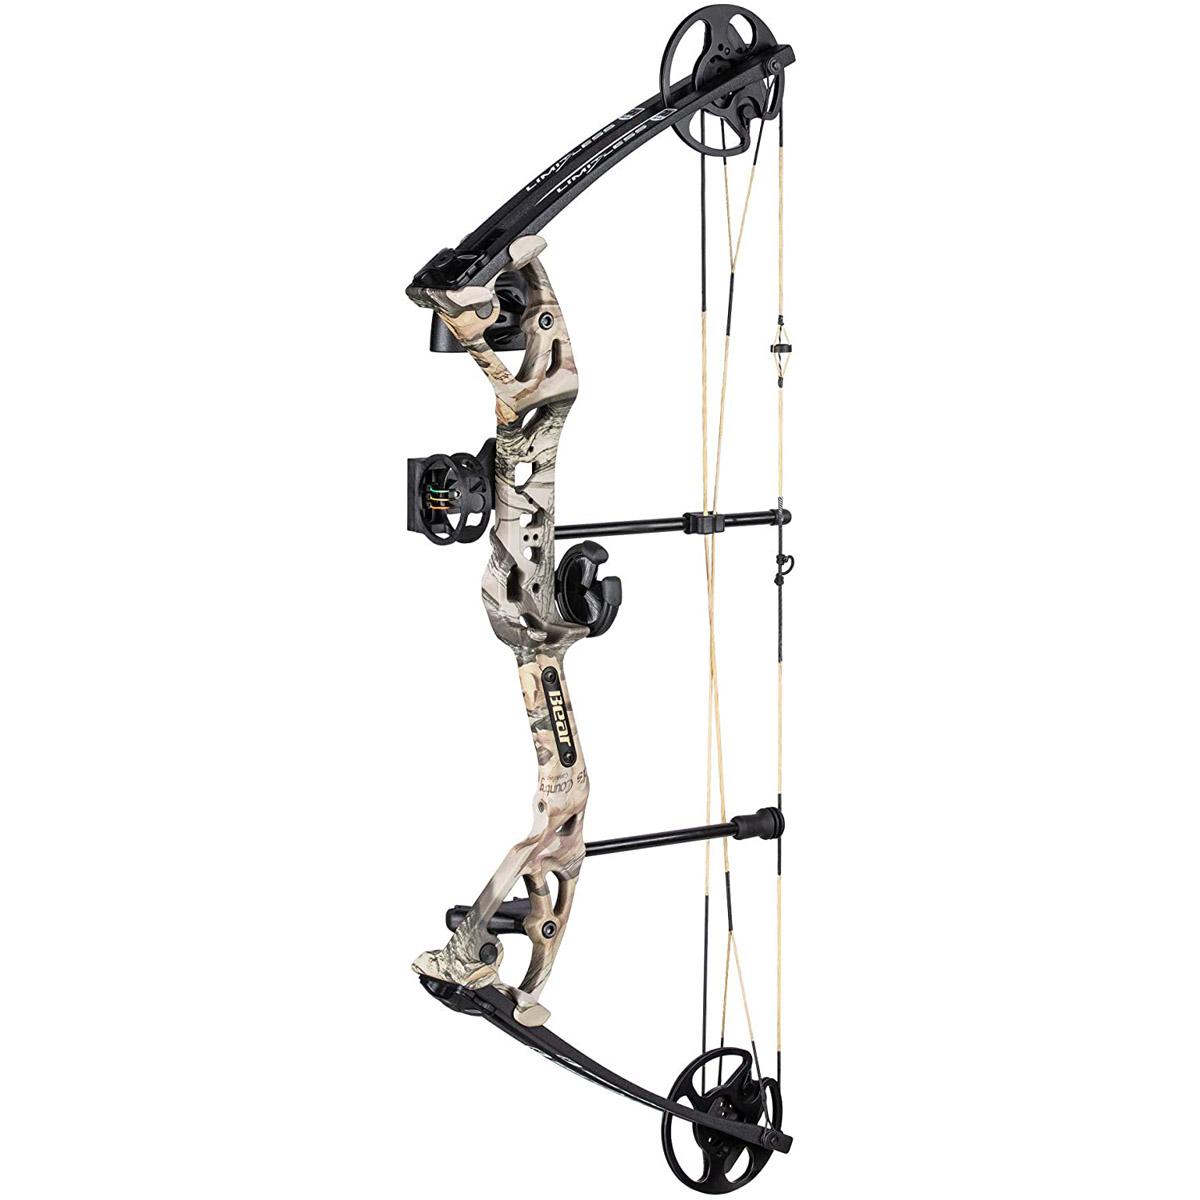 Bear Limitless Dual Cam Compound Bow for $171.83 Shipped